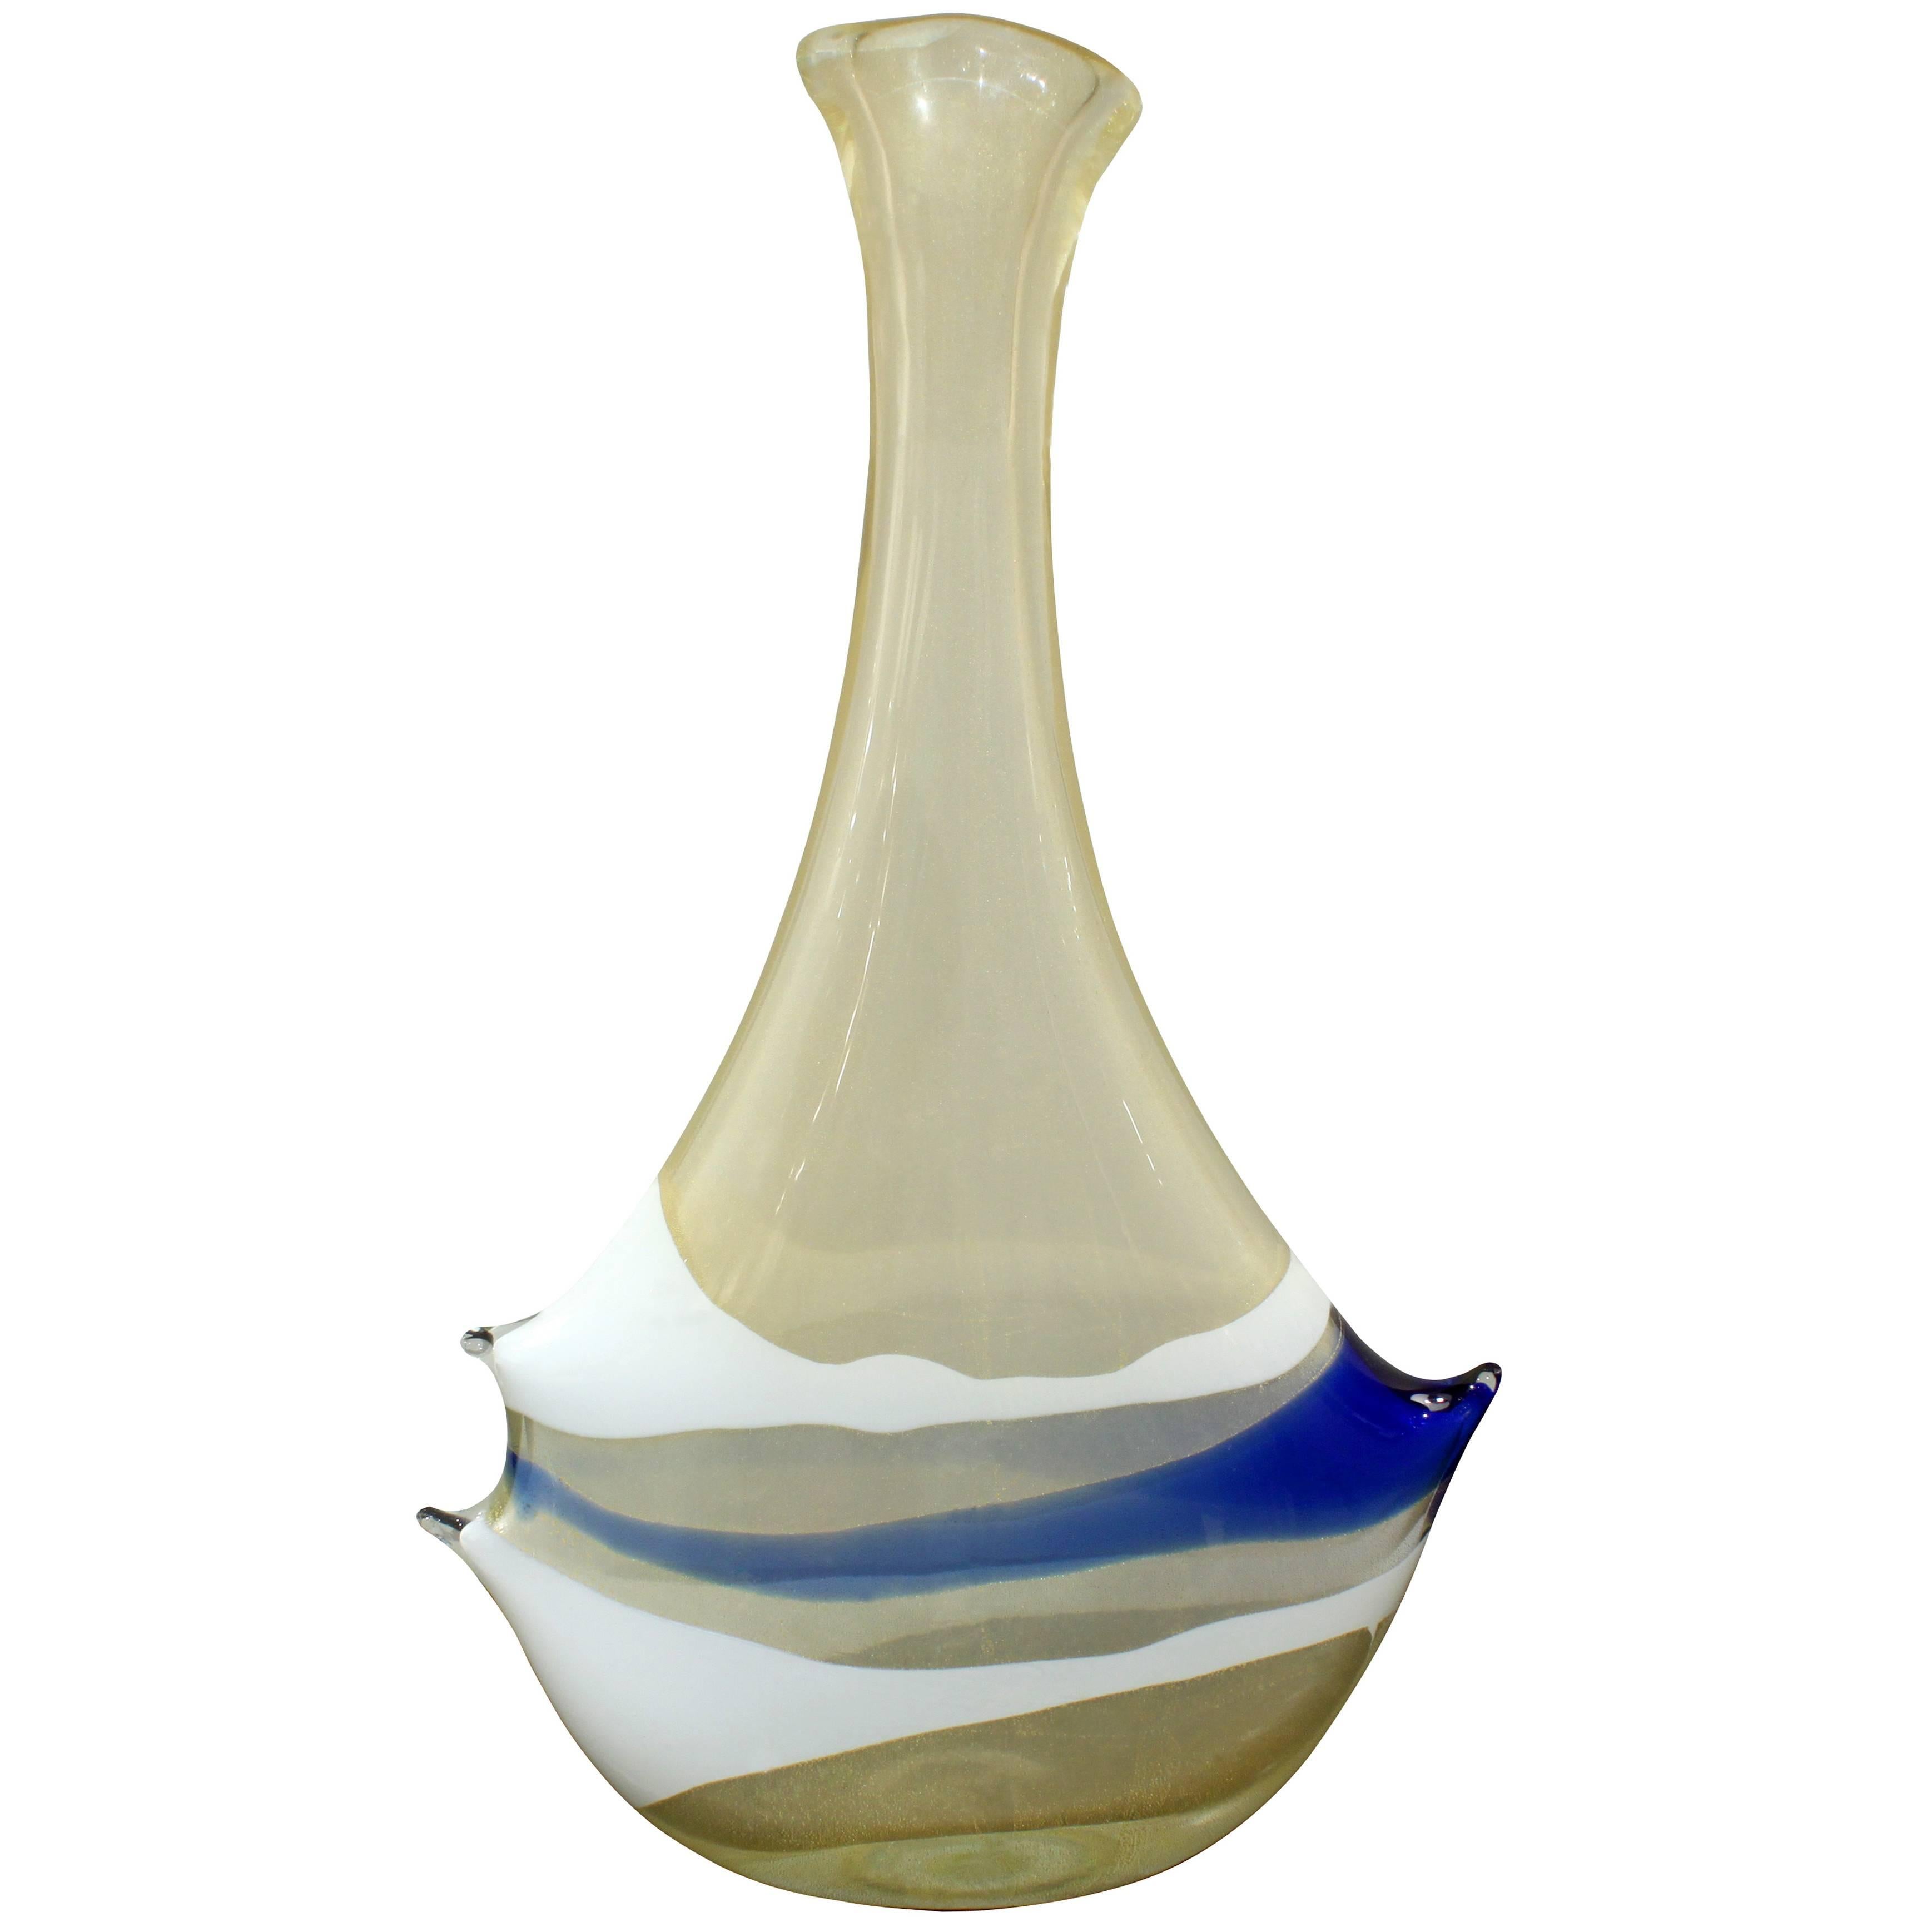 Exceptional Handblown "Bands" Vase by Anzolo Fuga for A.V.E.M 1956-60